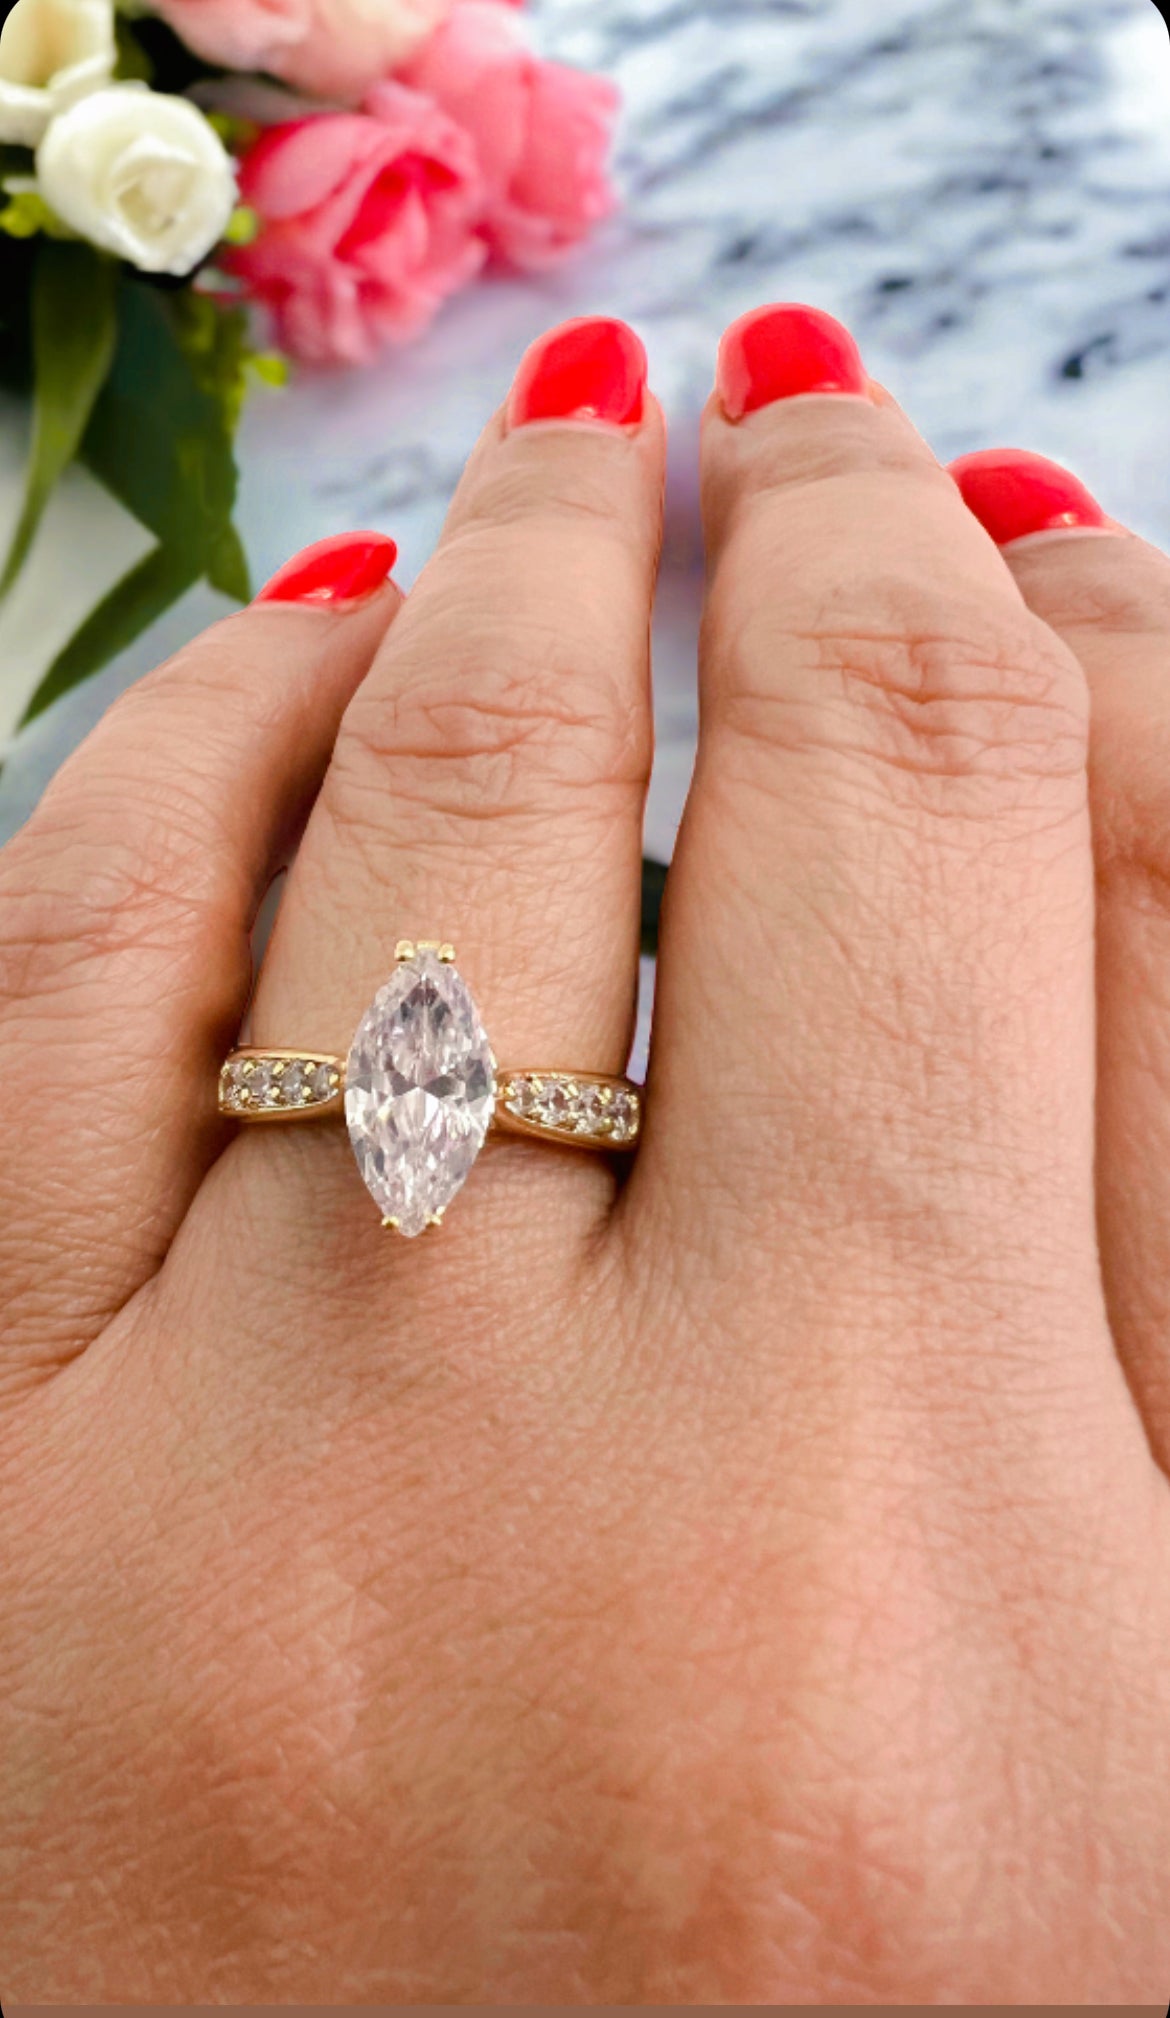 Marquise Stone Ring, Half Eternity Band Jewelry, 14k Gold Plated, Cubic Zircon Stones, Eco-Friendly Copper, Nickel-Free, Hypoallergenic, Timeless Glamour, Modern Sophistication, Statement Ring.